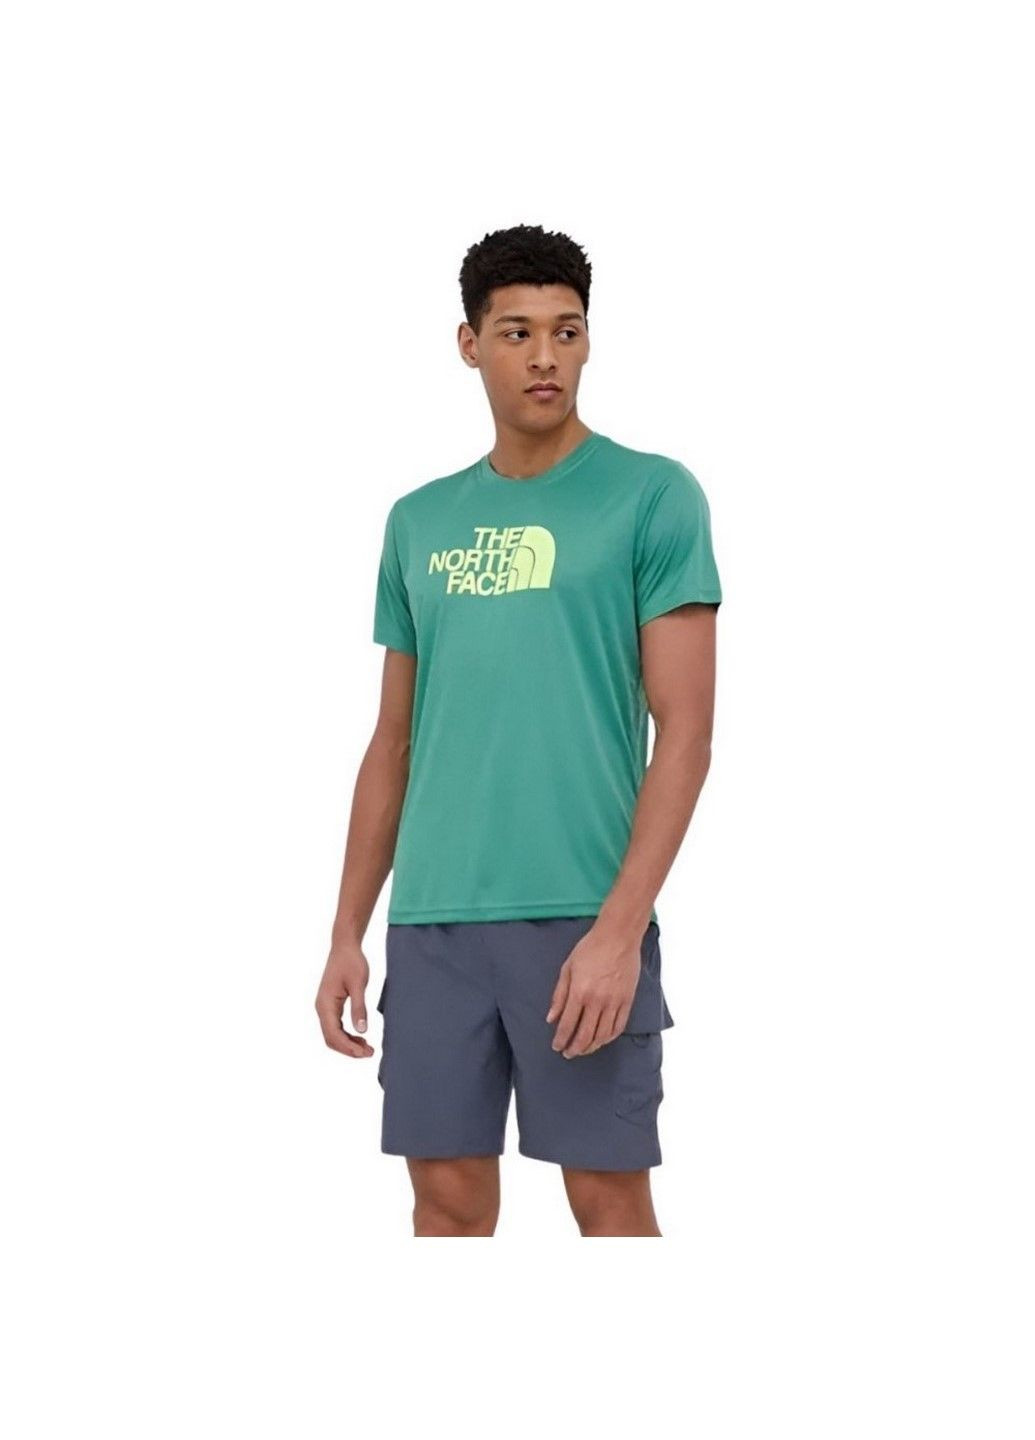 Зеленая футболка m reaxion easy tee nf0a4cdvn111 The North Face